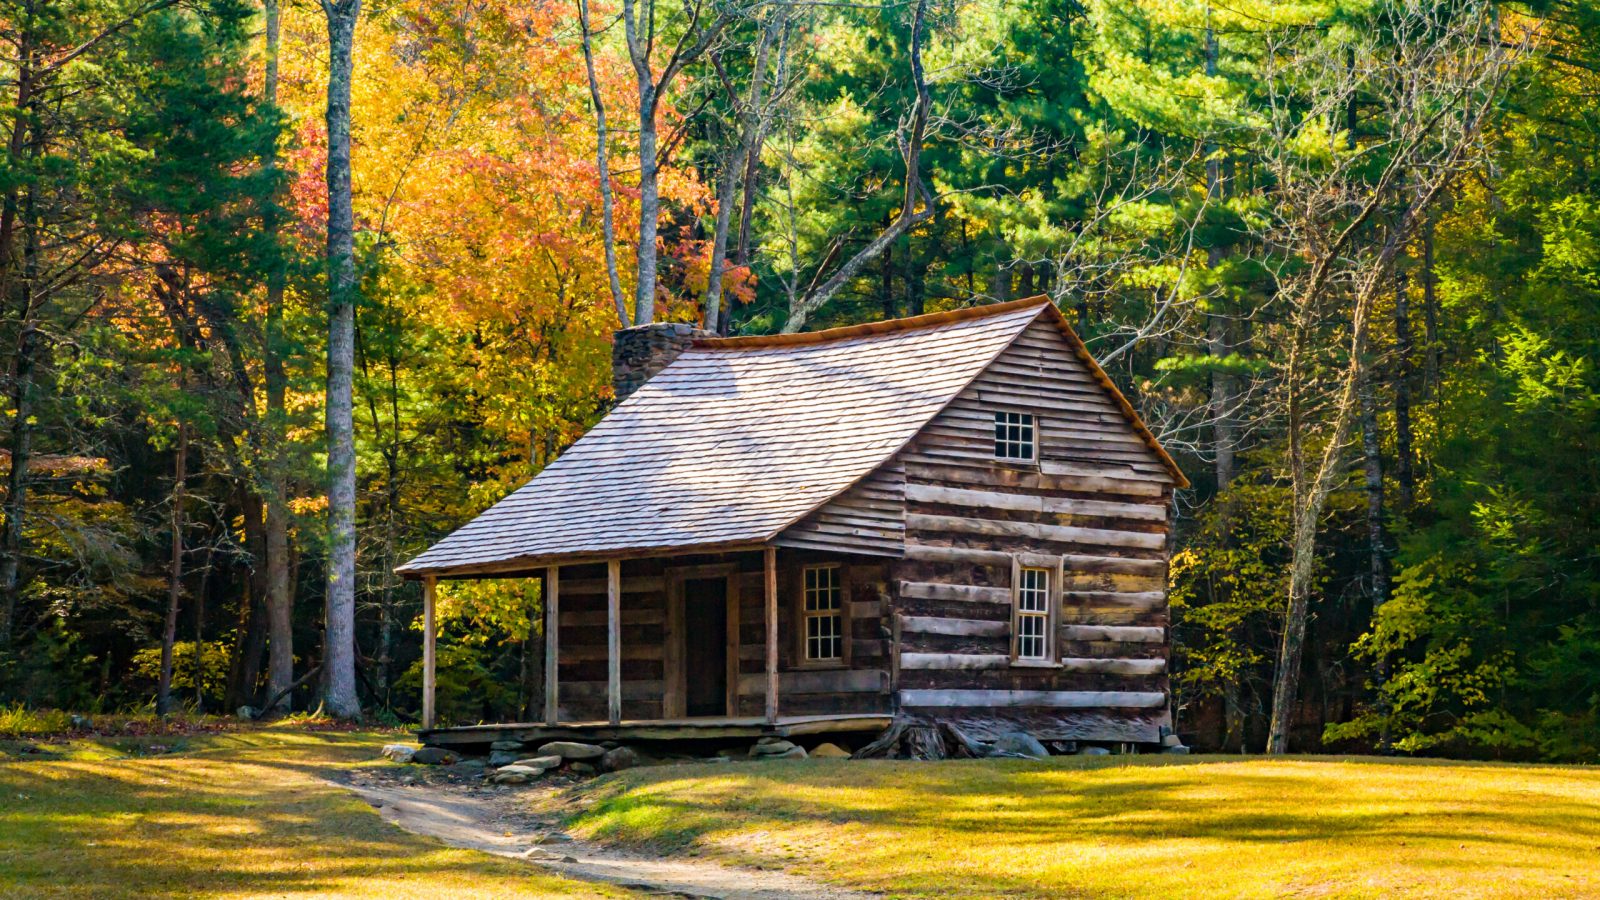 Cades Cove is one of the best things to do in Gatlinburg